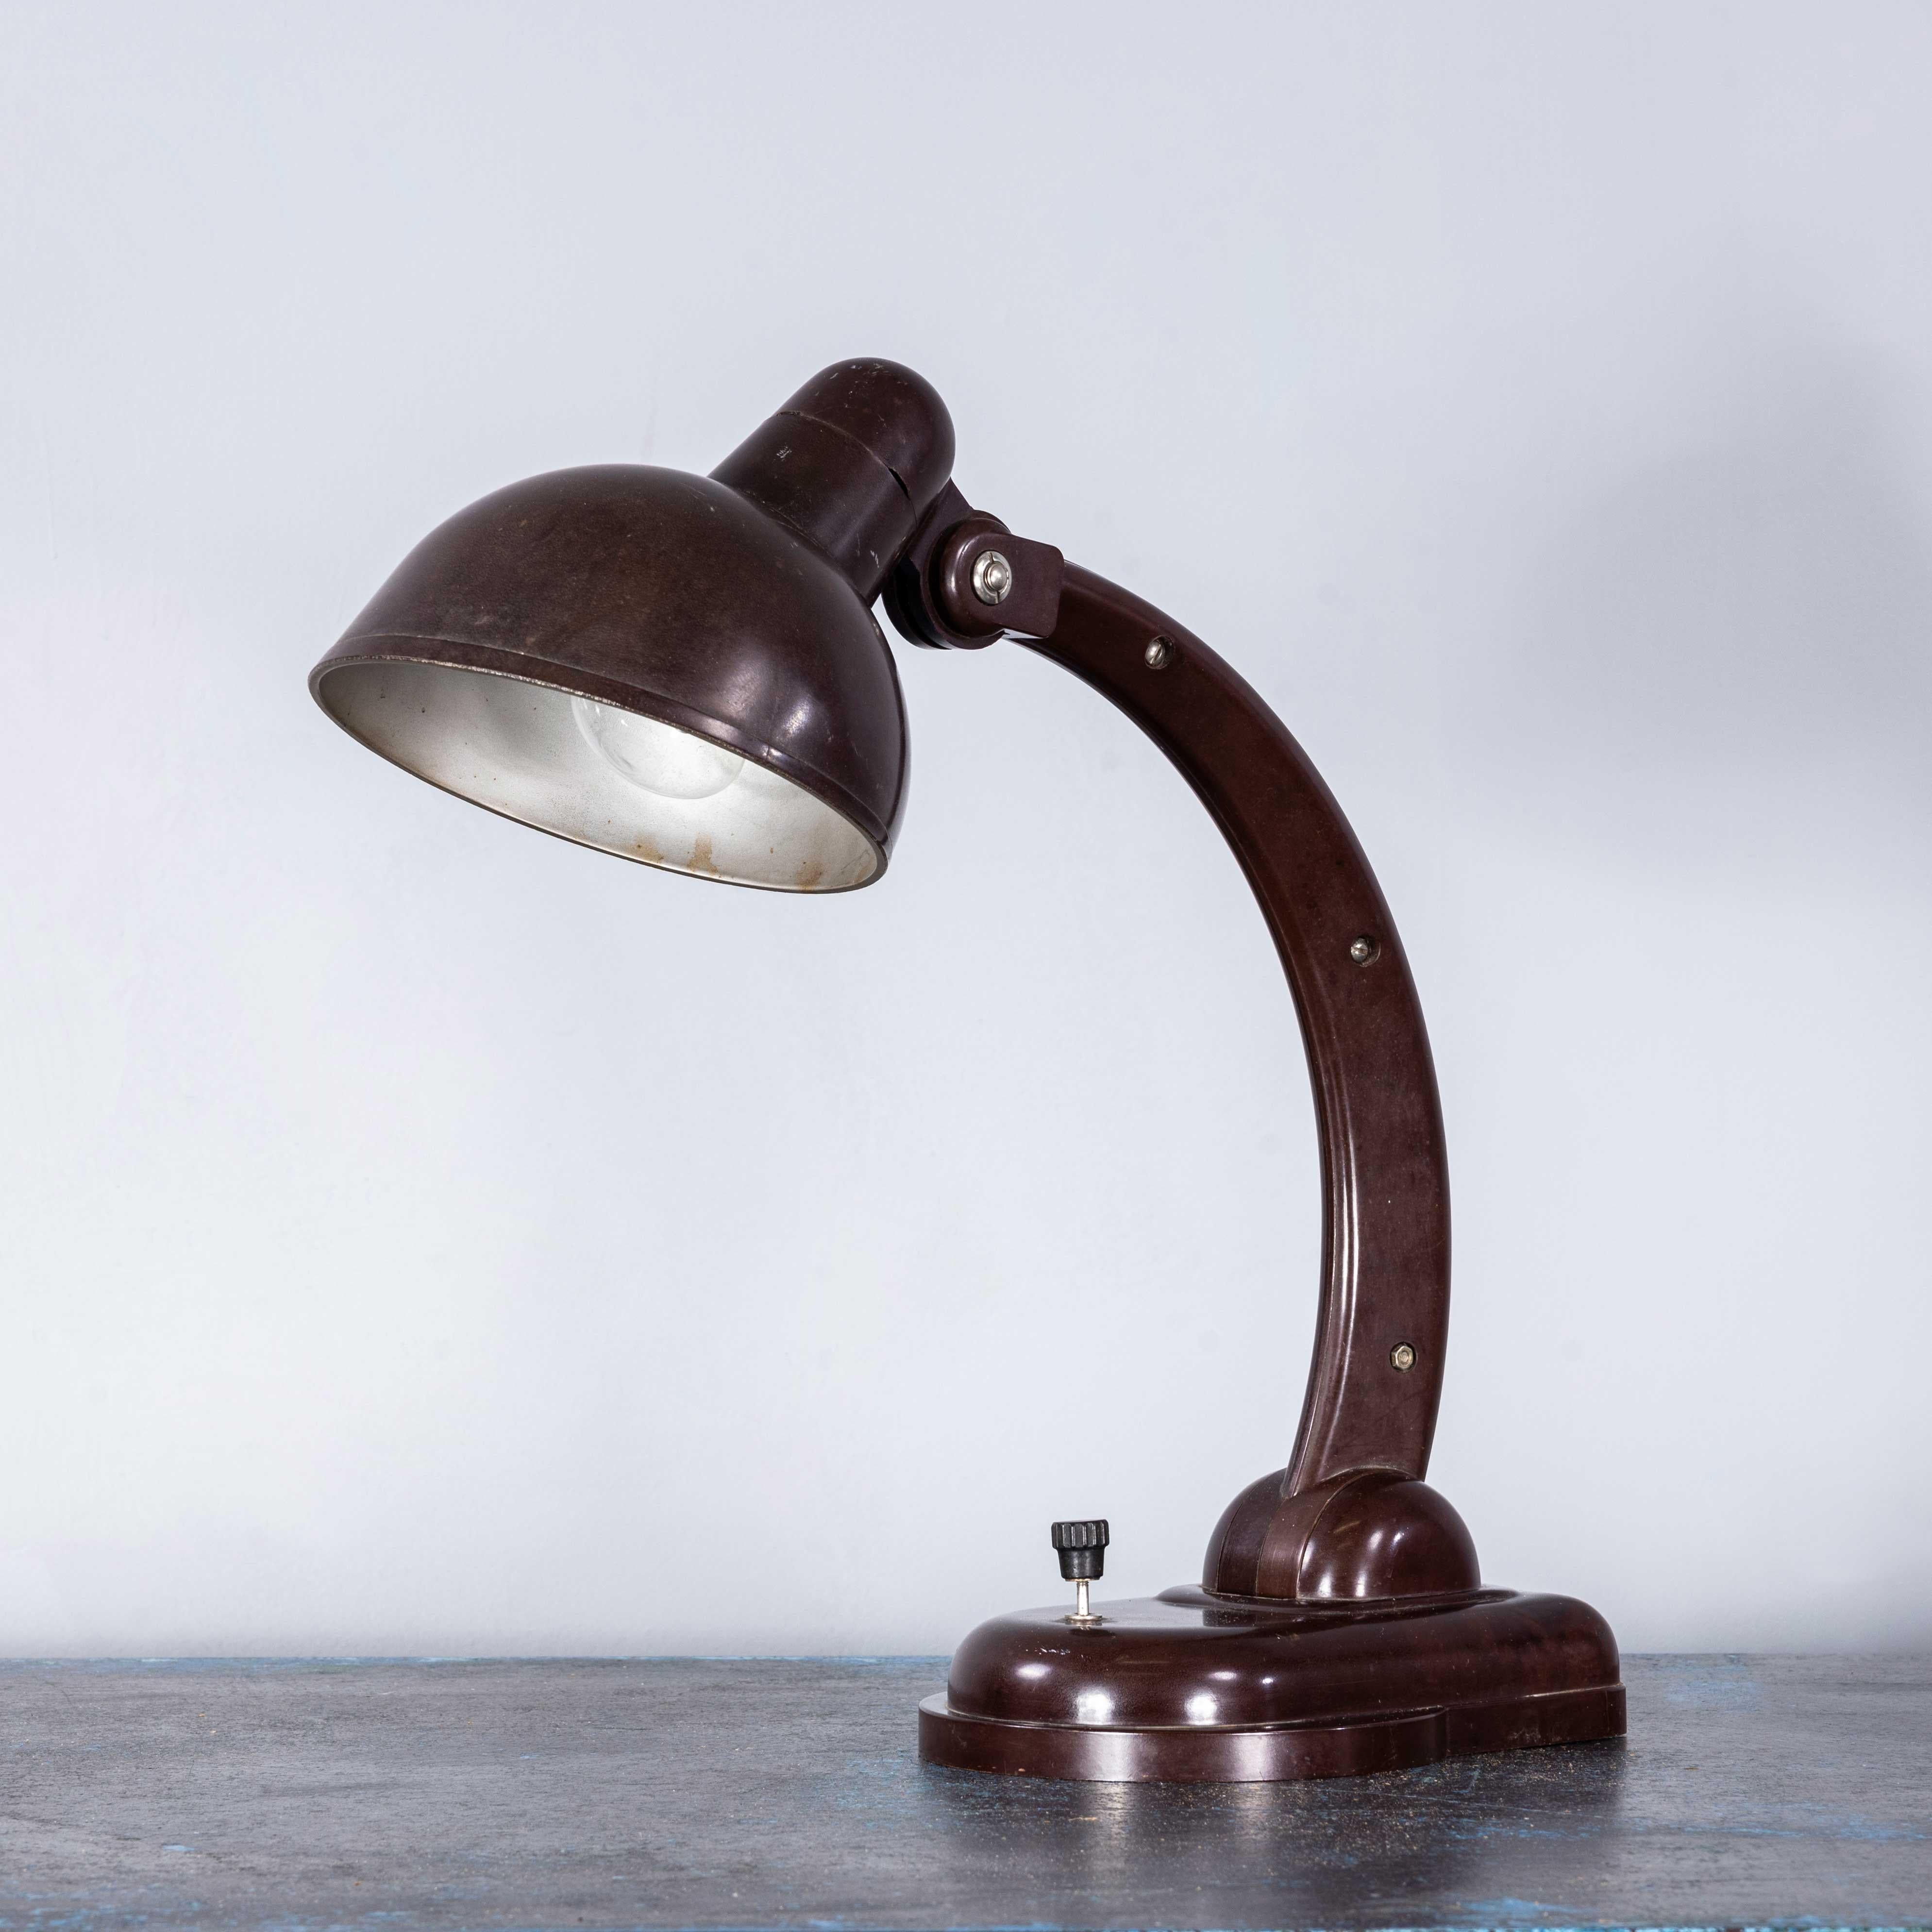 1930’s Original Adjustable German Bakelite Desk Lamp
1930’s Original German Bakelite Desk Lamp. Good honest very original Bakelite desk lamp with an adjustable main arm and tilting shade head. Our workshop has serviced and tested all the components